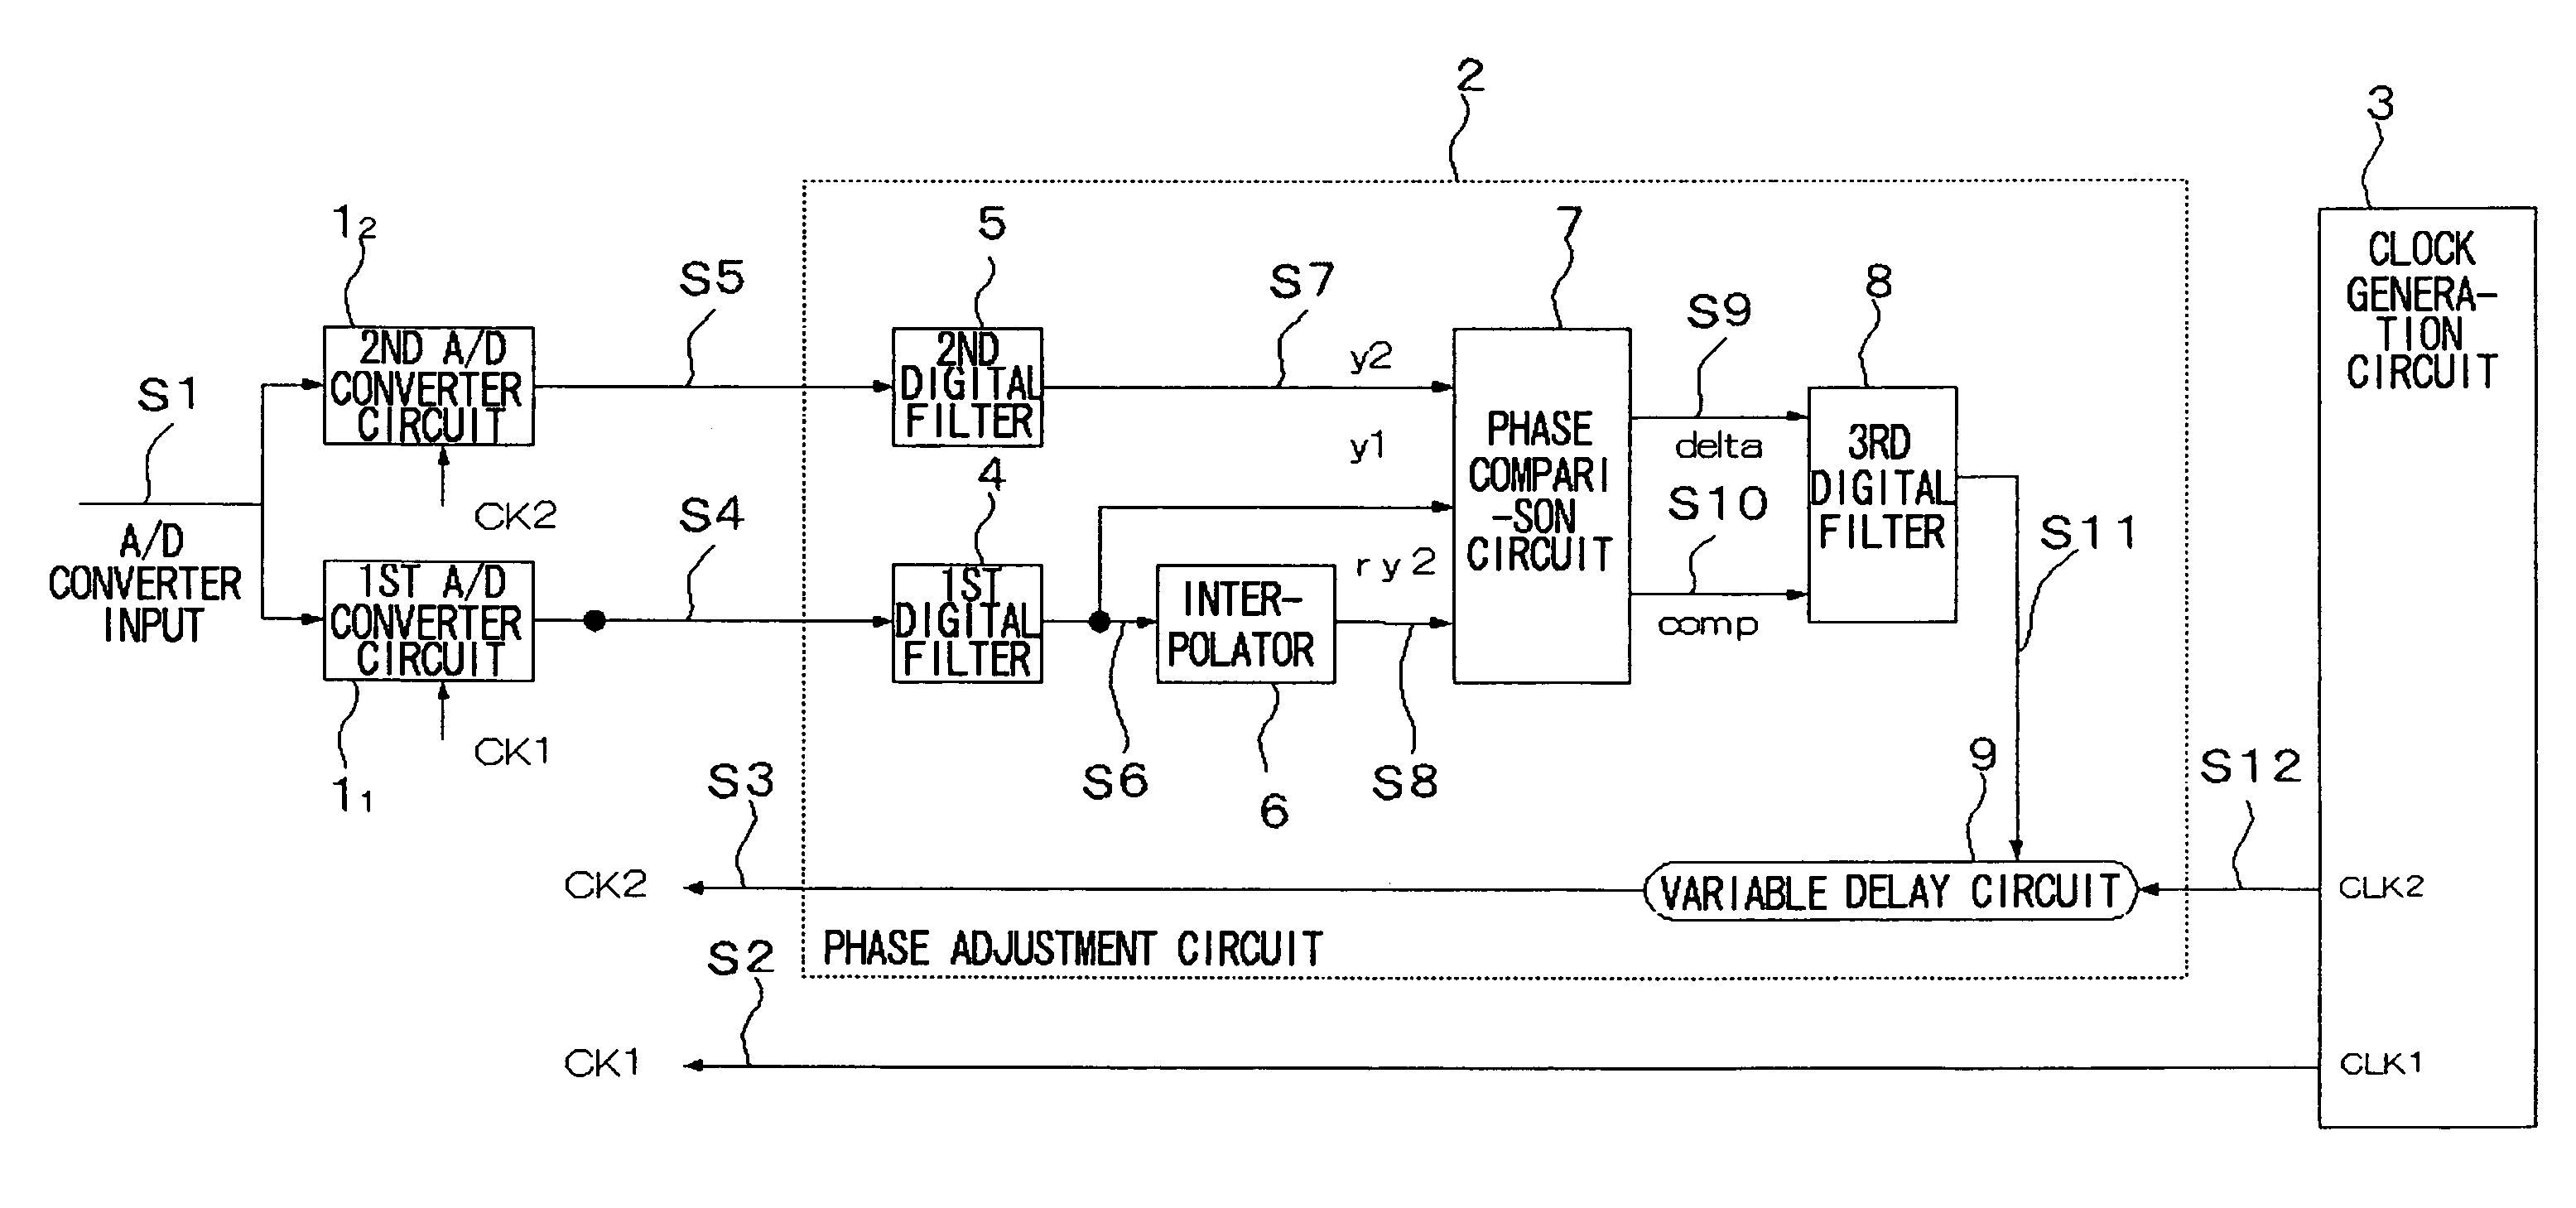 Time-interleaved A/D converter device